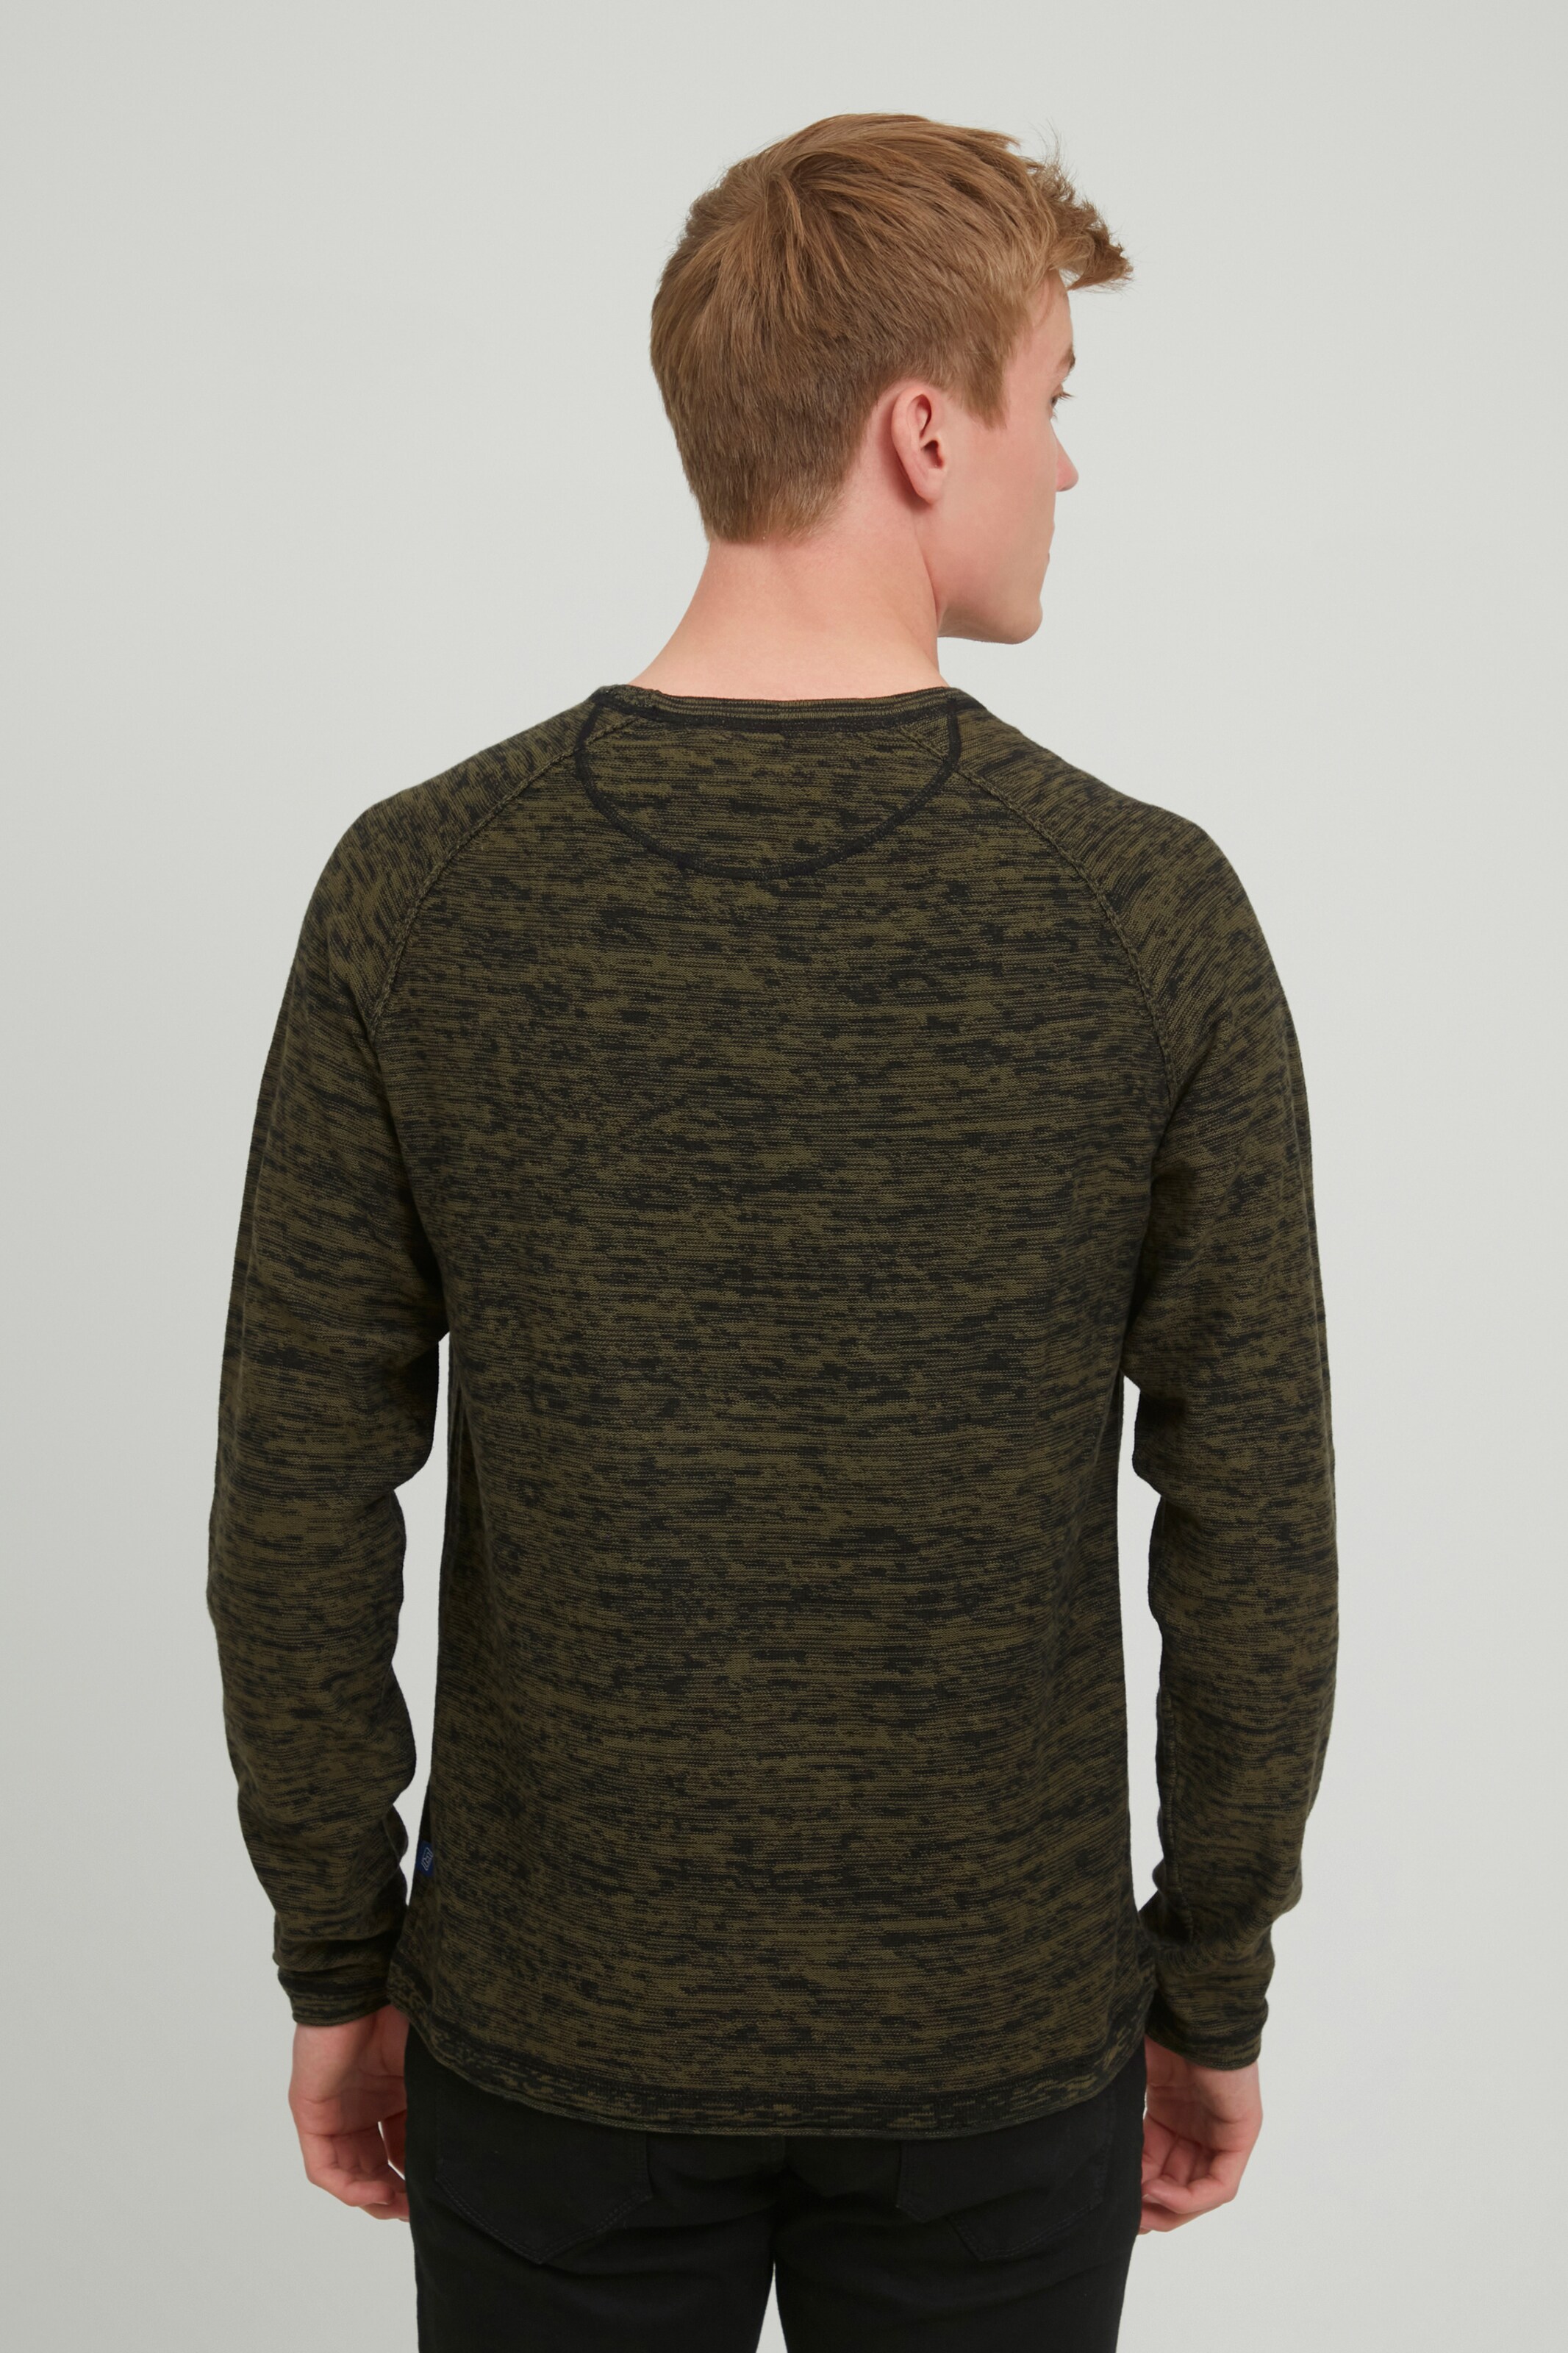 ABOUT YOU BLEND Grünmeliert in Pullover Oliv, |